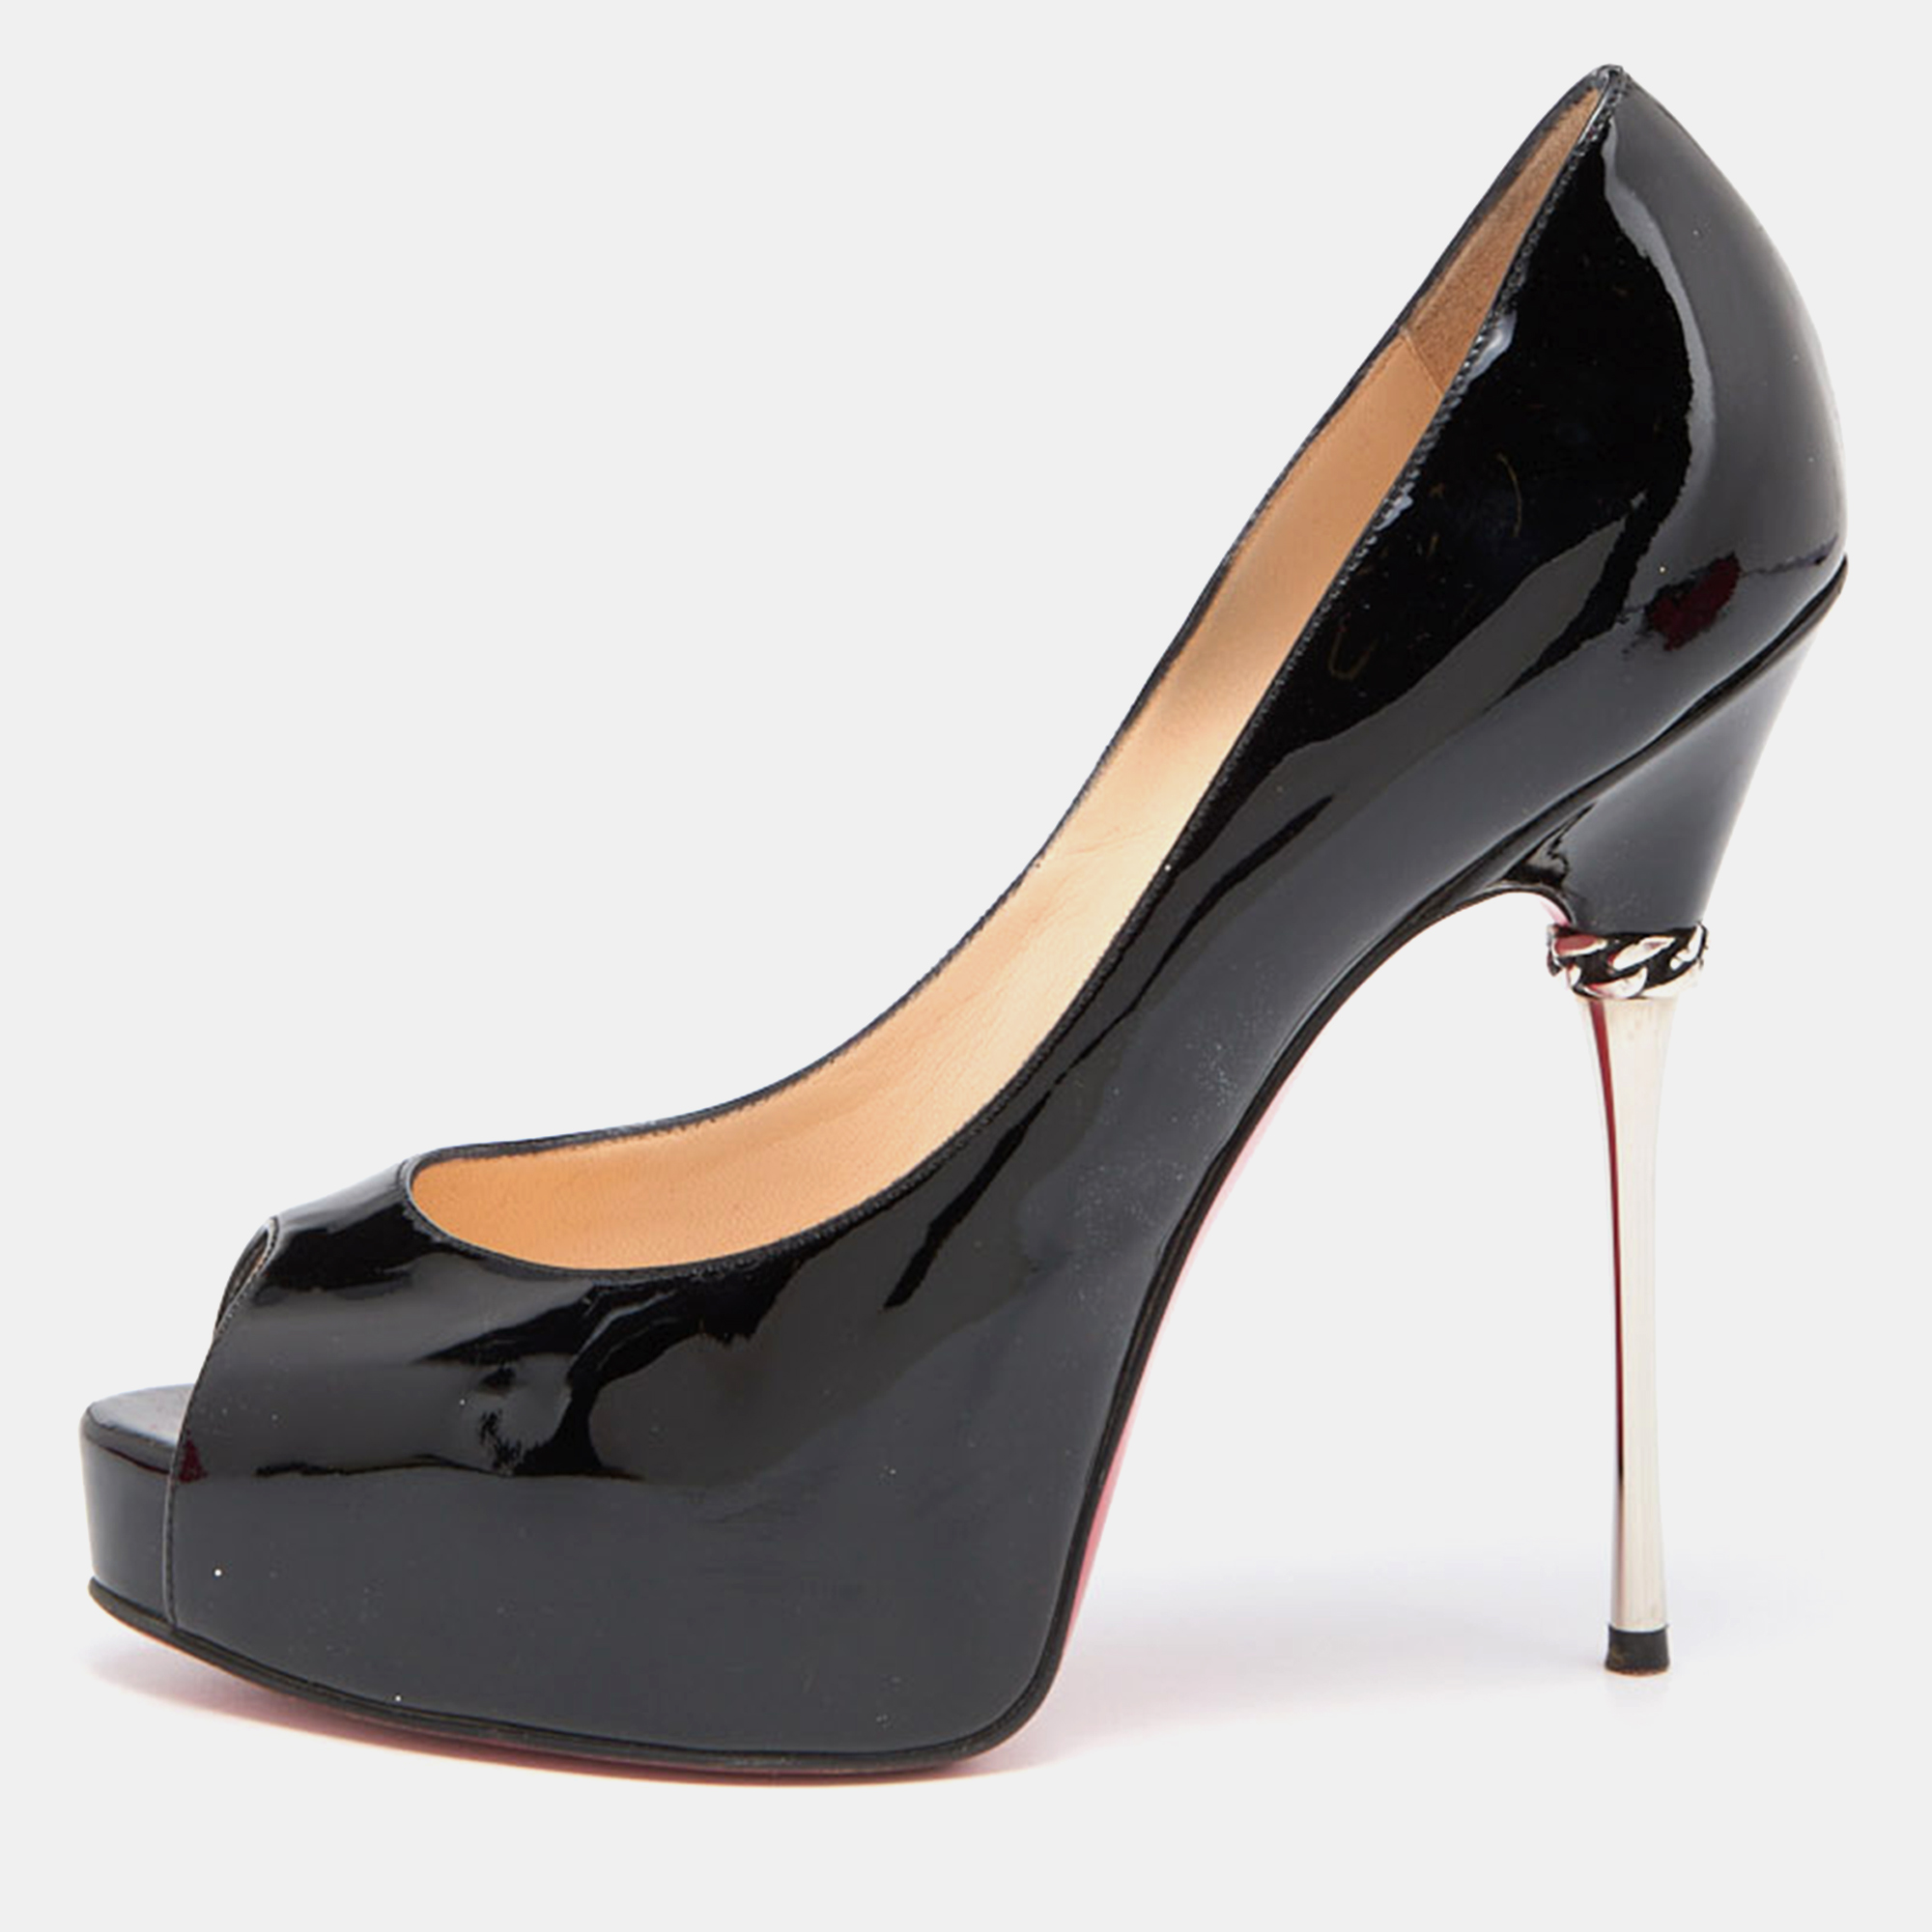 This pair of pumps is uniquely designed and makes for a distinct appearance. Created from quality materials it is enriched with classic elements.